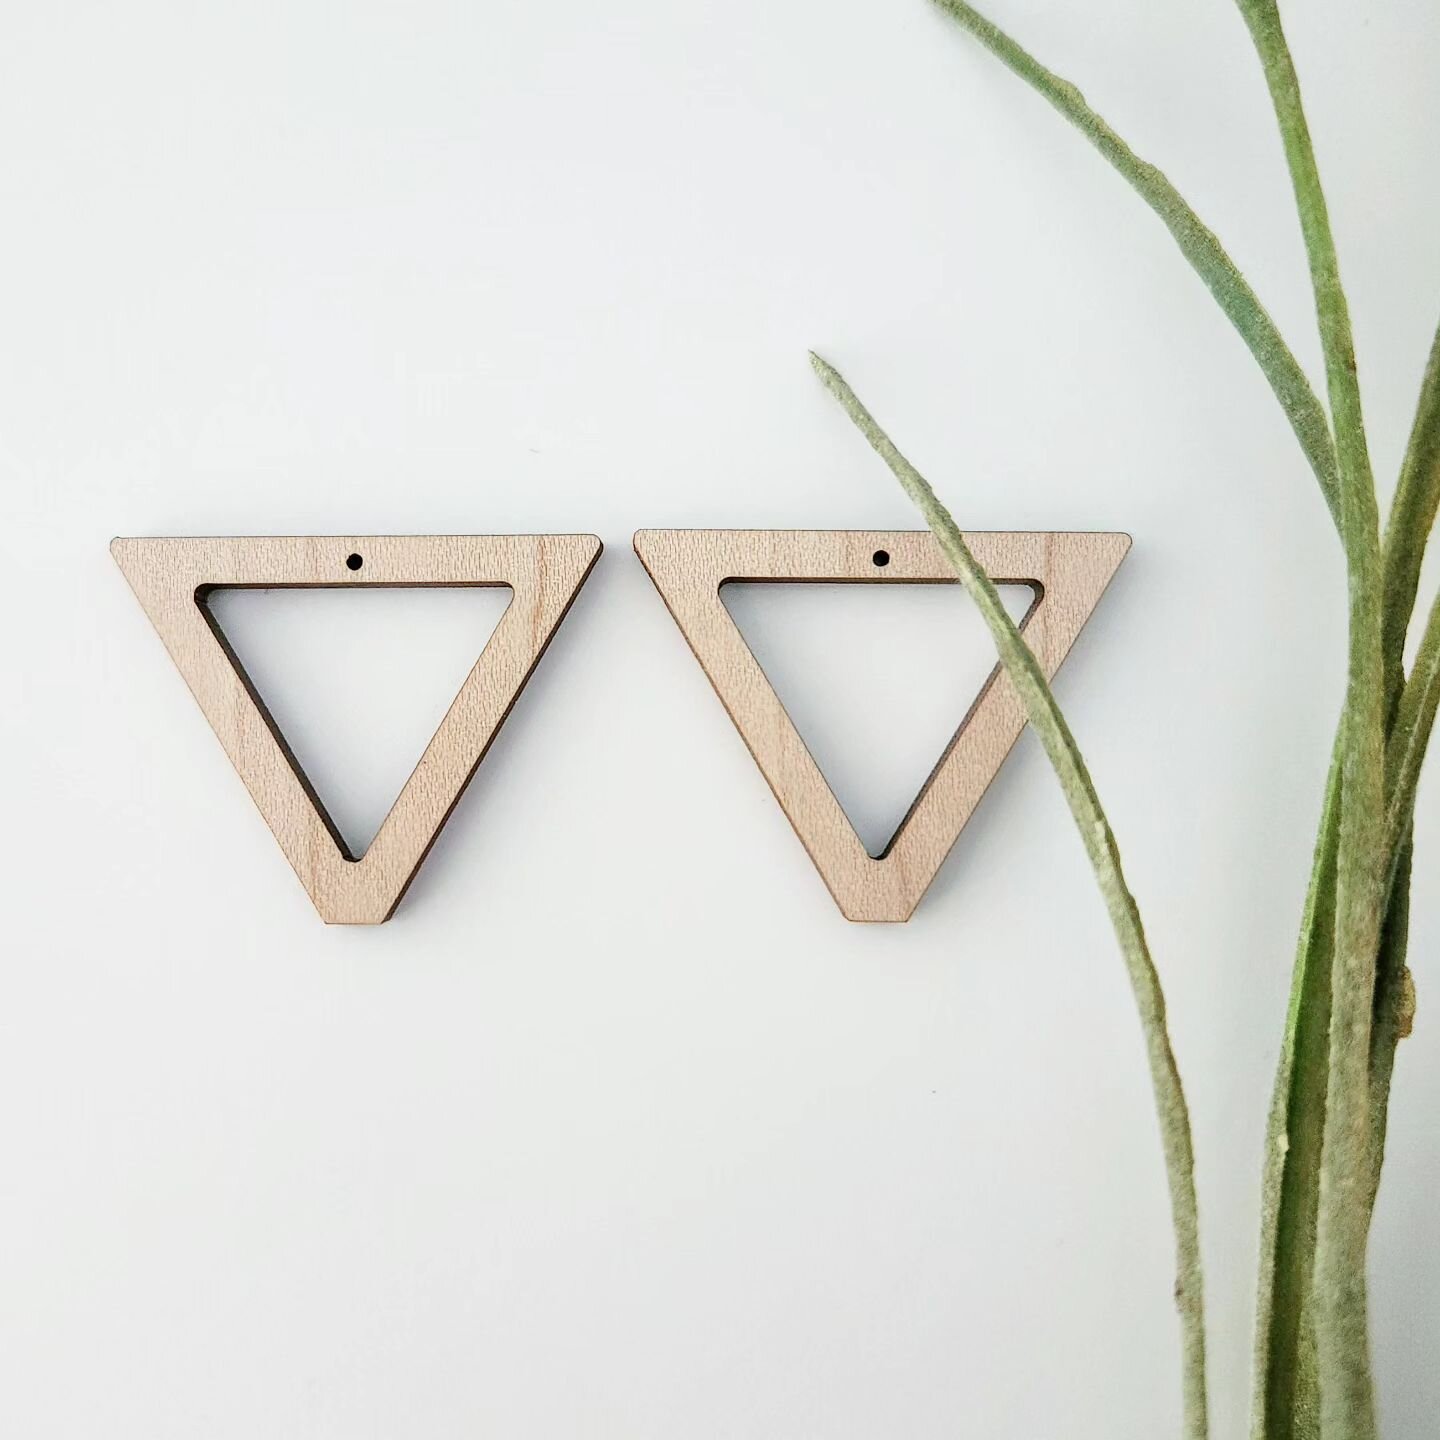 These upside down triangles were added to the shop last November (😅) but I never posted about them... so here they are now!🙌

Lots of new items coming up... are we excited!?

.
.
.

#wholesaleearrings #earringwholesale #earringwholesaler #macrameea